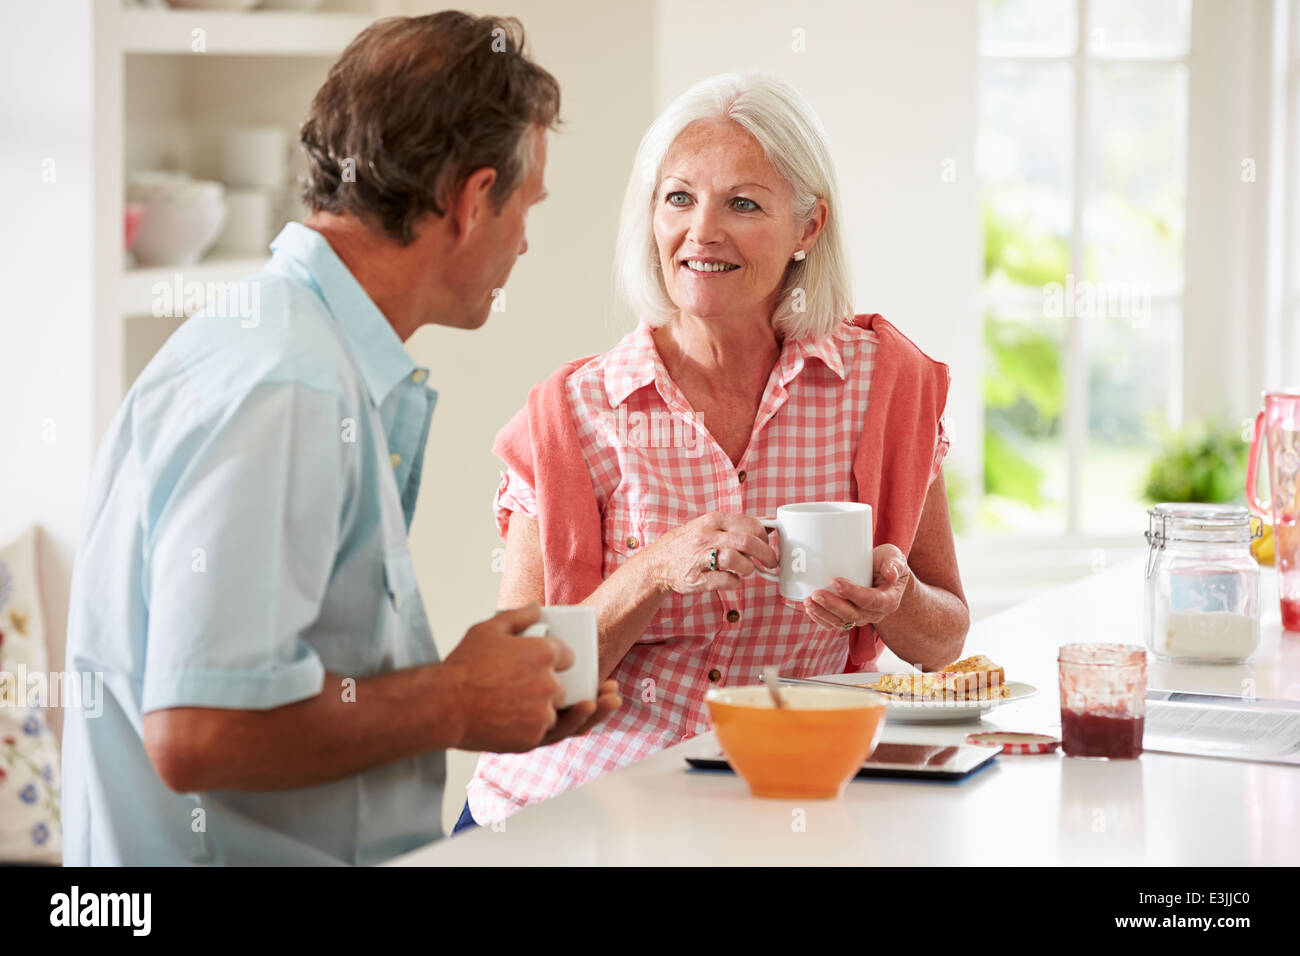 Middle Aged Couple Enjoying Breakfast At Home Together Stock Photo